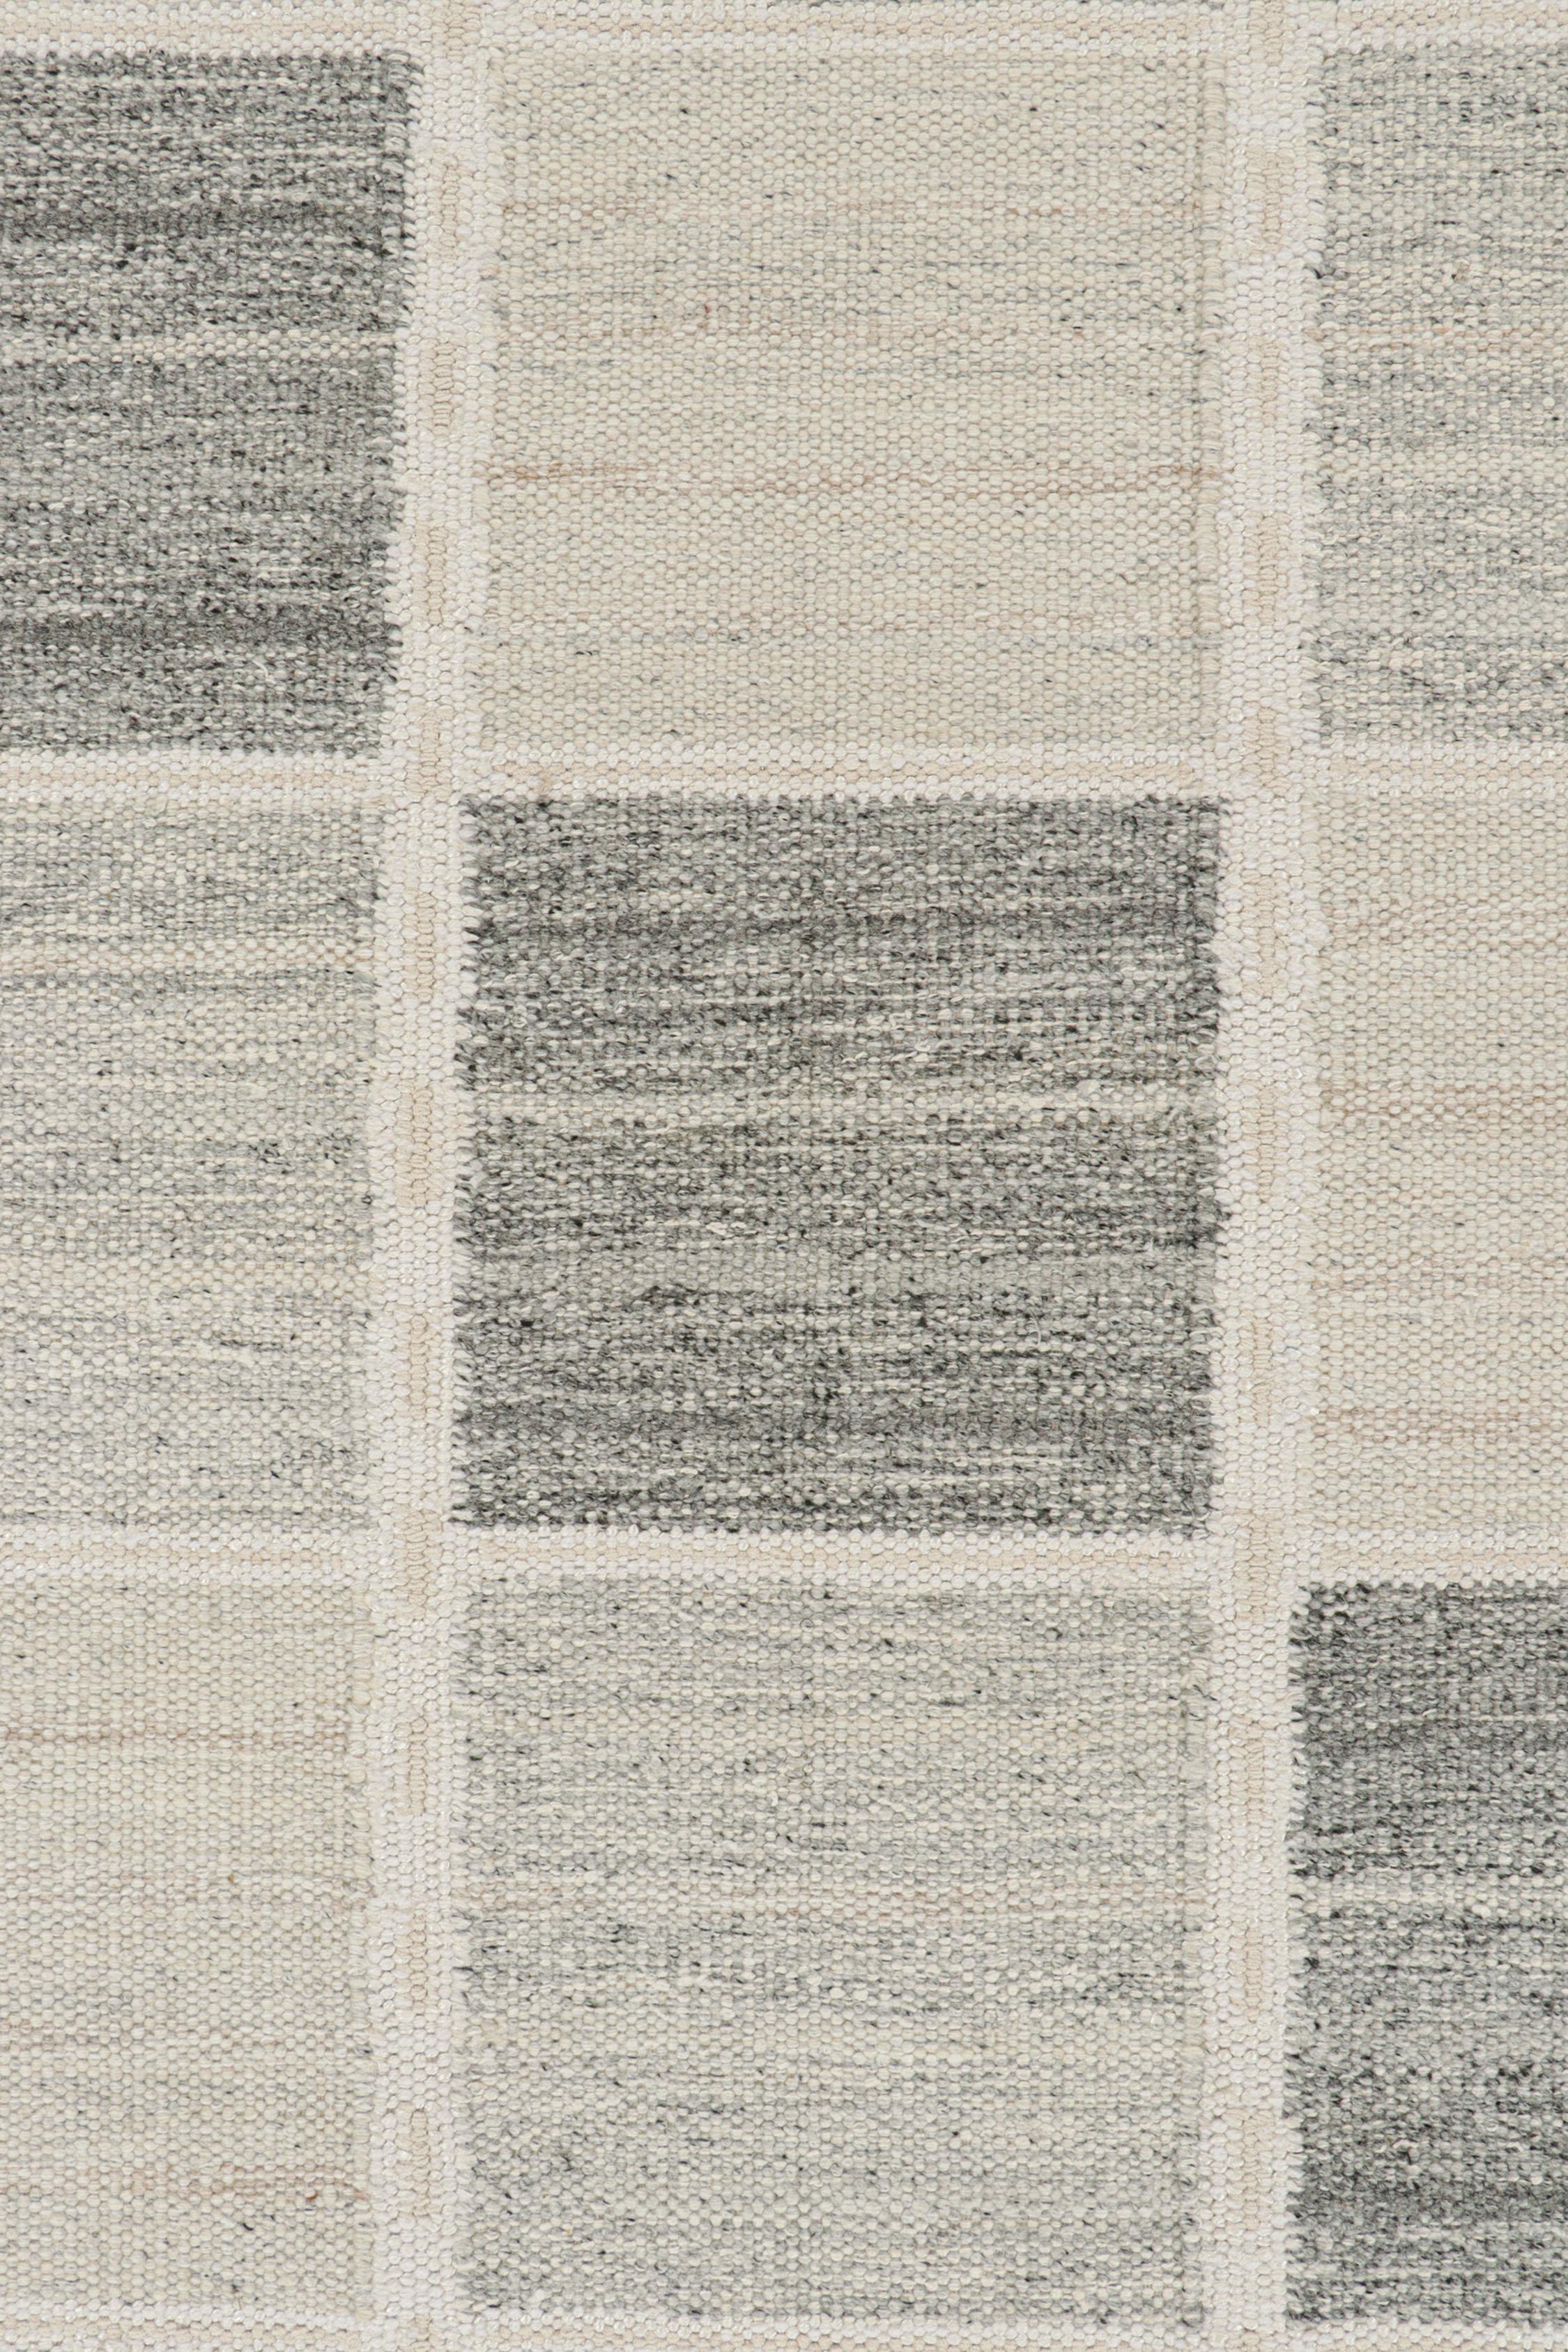 Rug & Kilim’s Scandinavian Style Kilim in Off-White and Grey Geometric Patterns In New Condition For Sale In Long Island City, NY